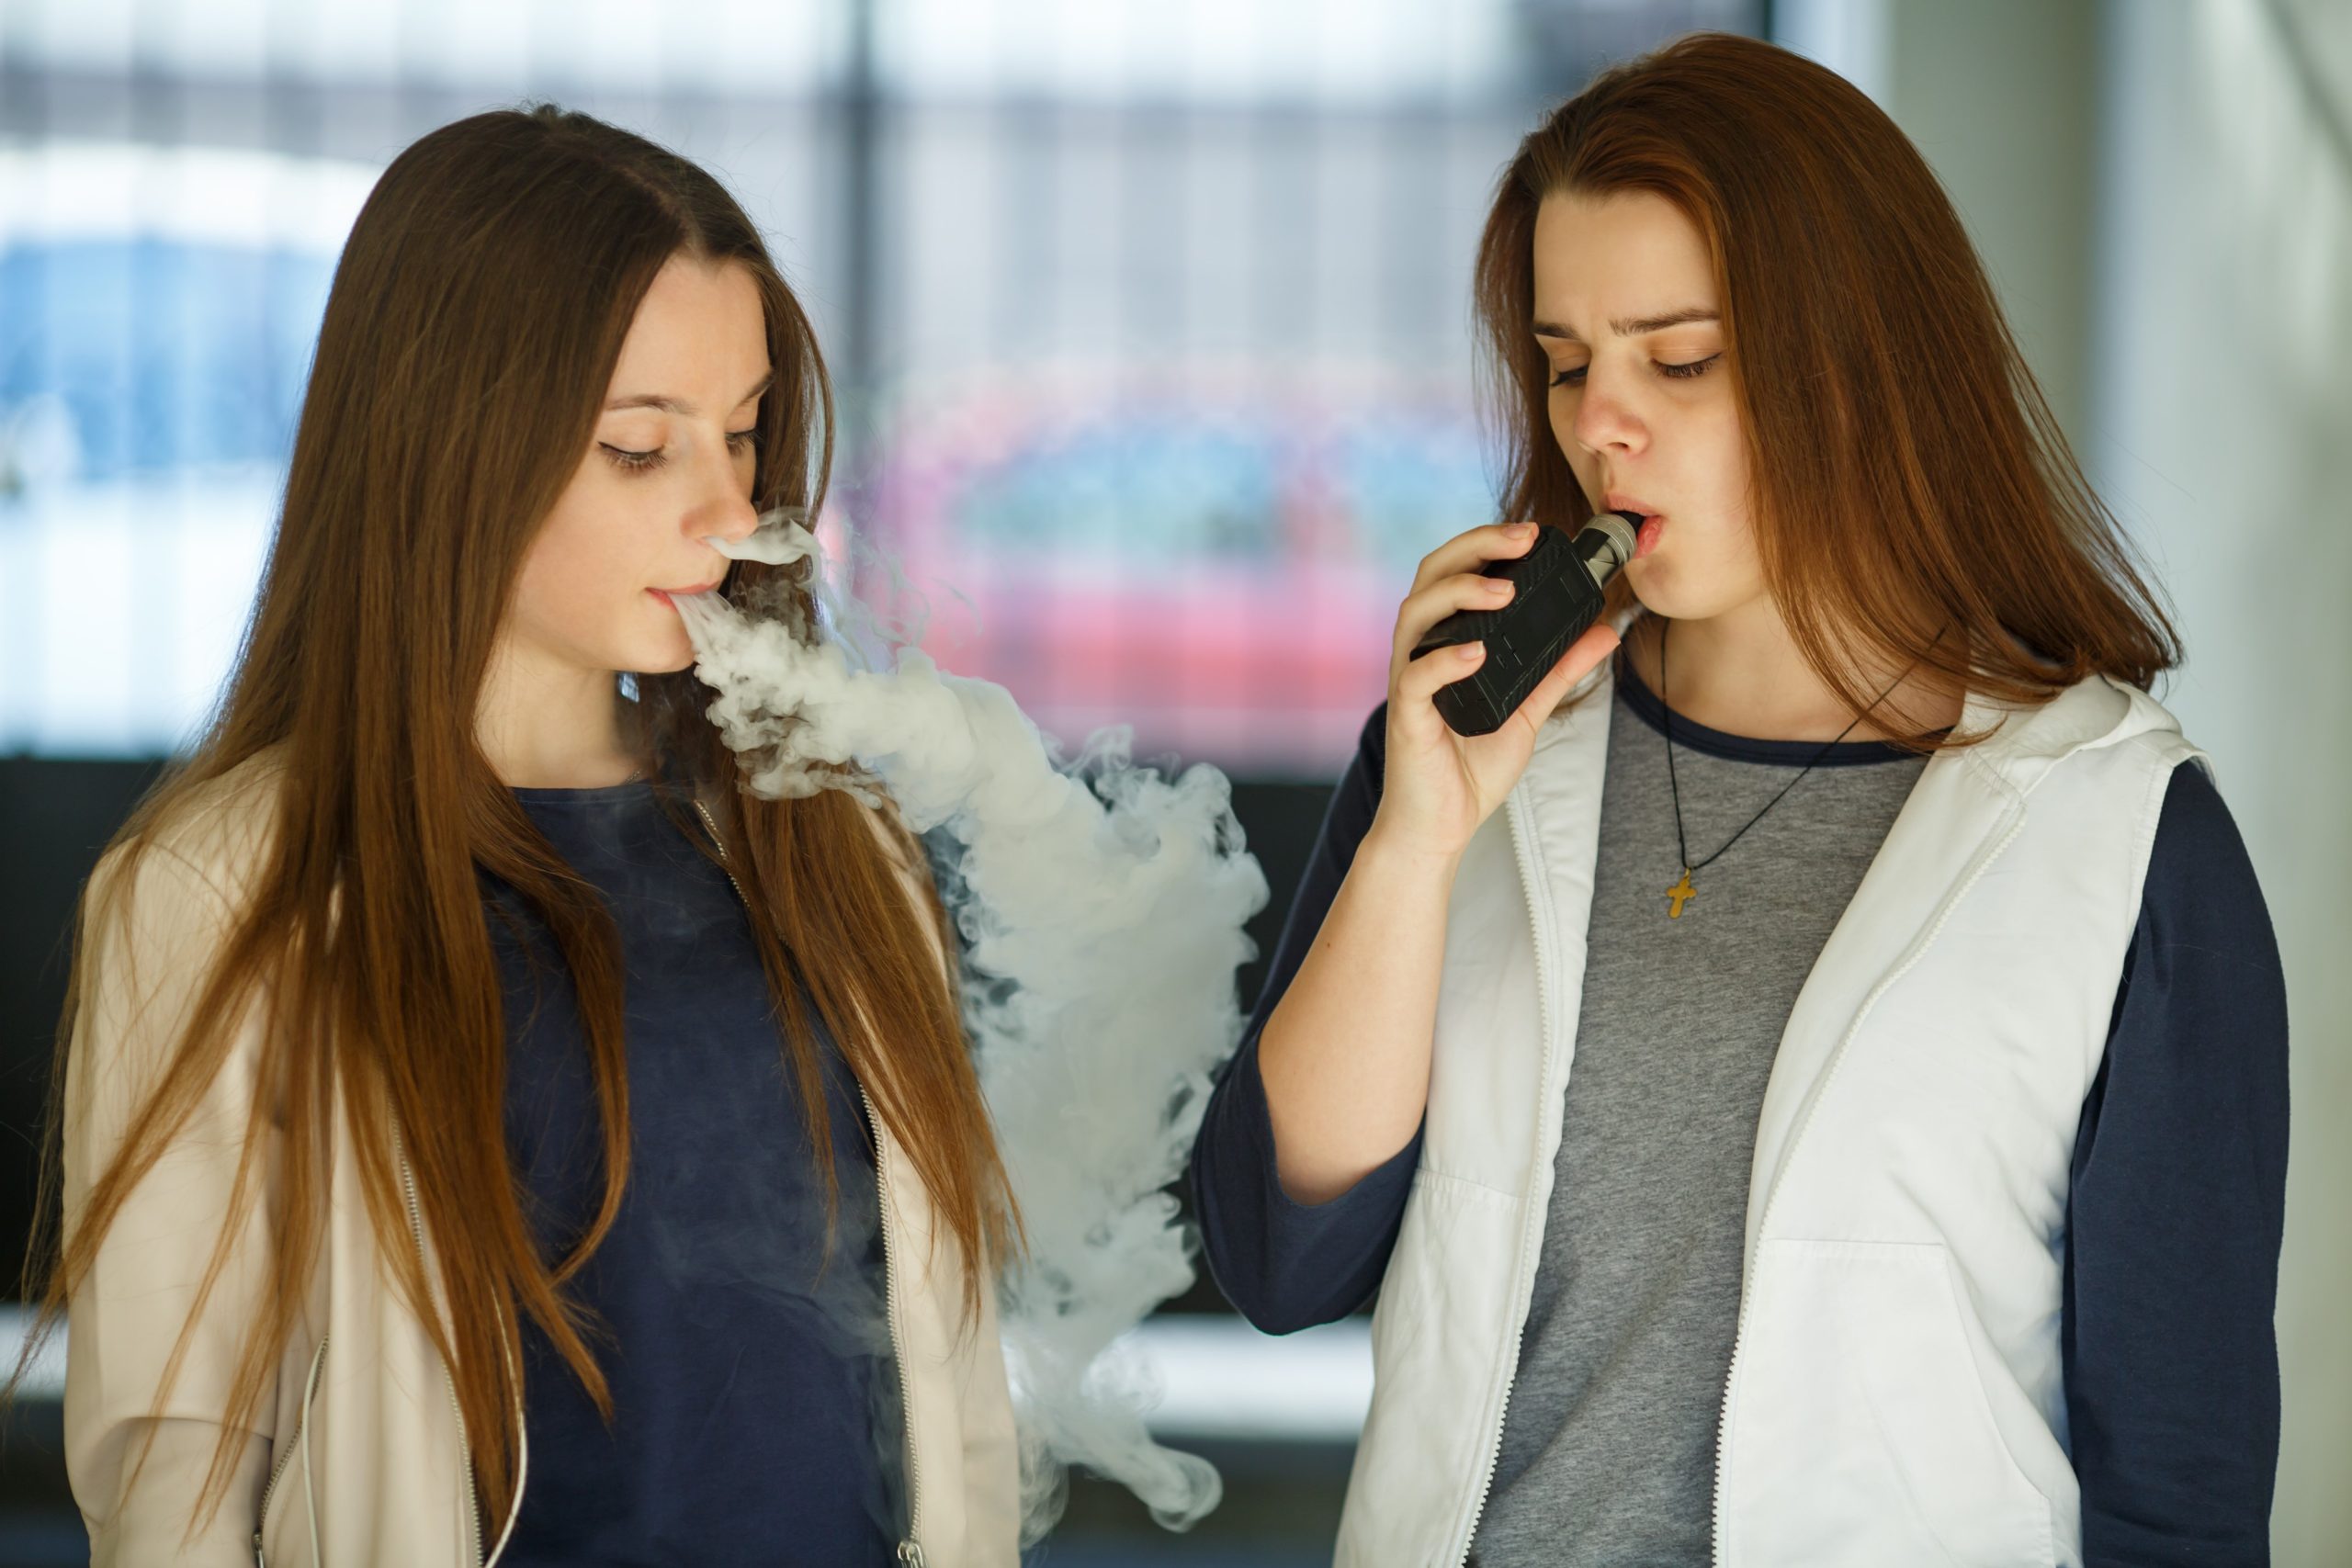 Government must avoid a ban on flavours as part of any future legislation on vaping – Vape Business Ireland